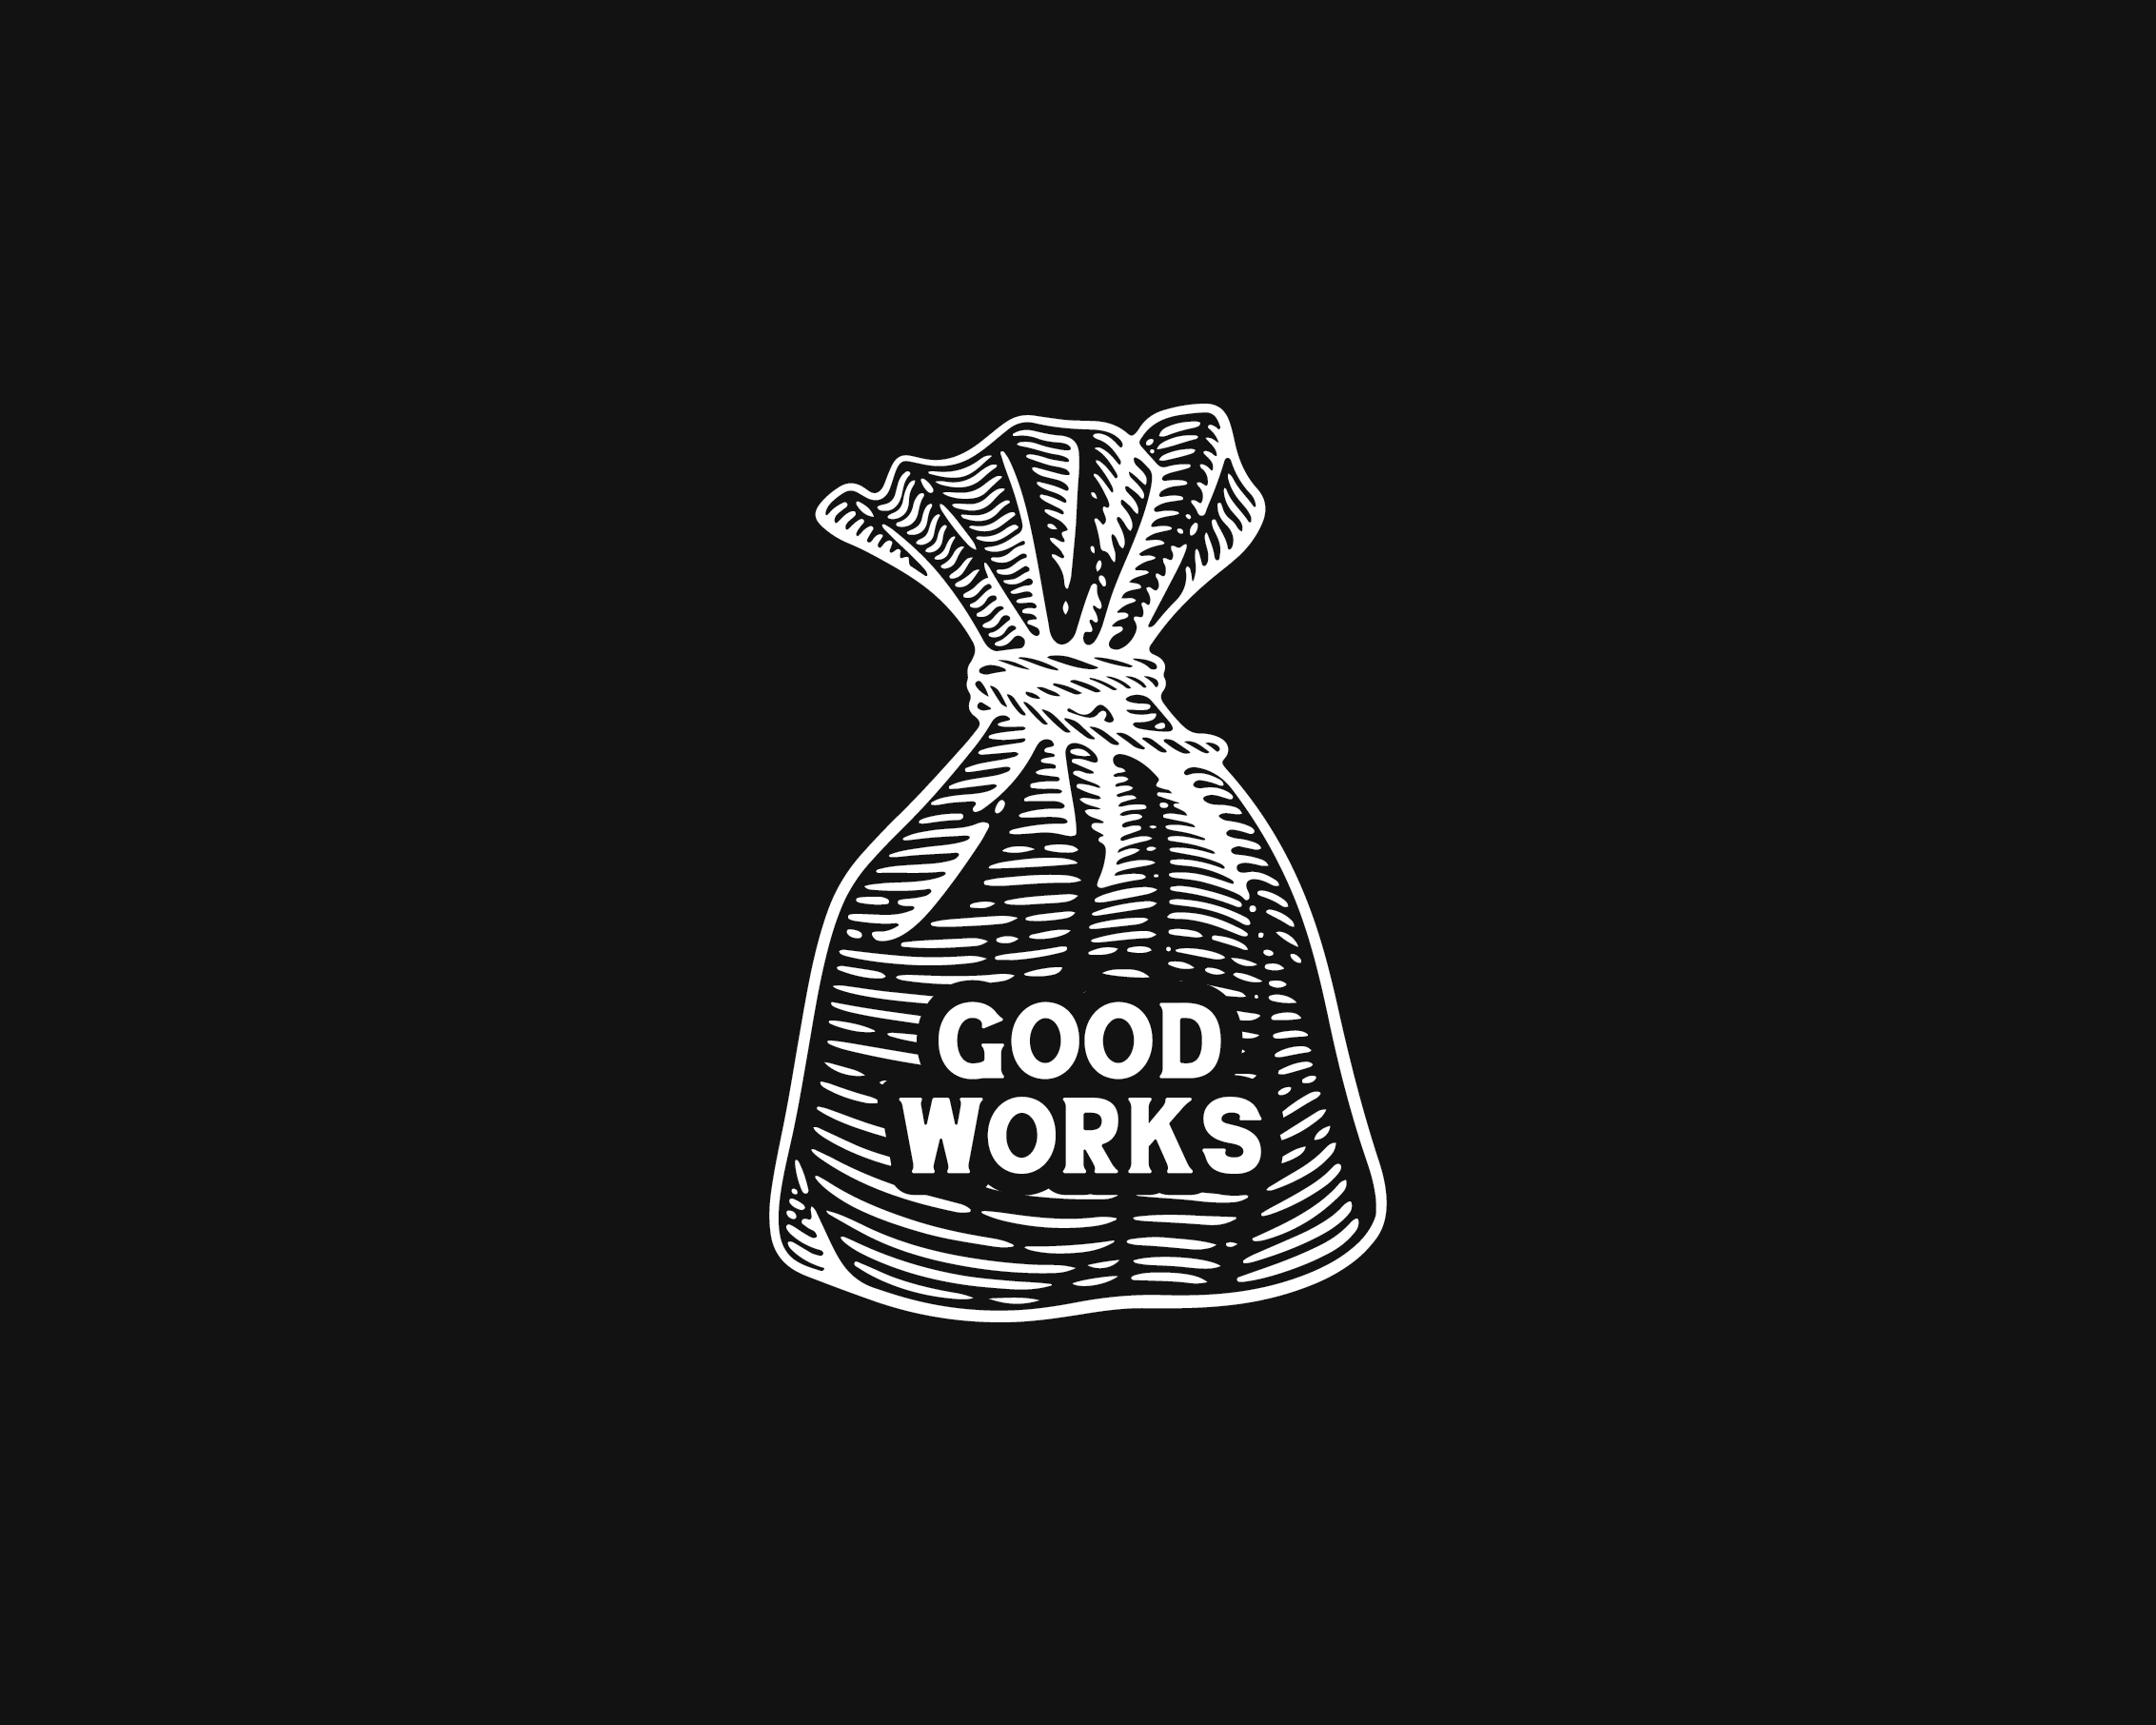 1 Timothy 6:18 "Riches in Good Works" (Greed & Giving - Week 4)